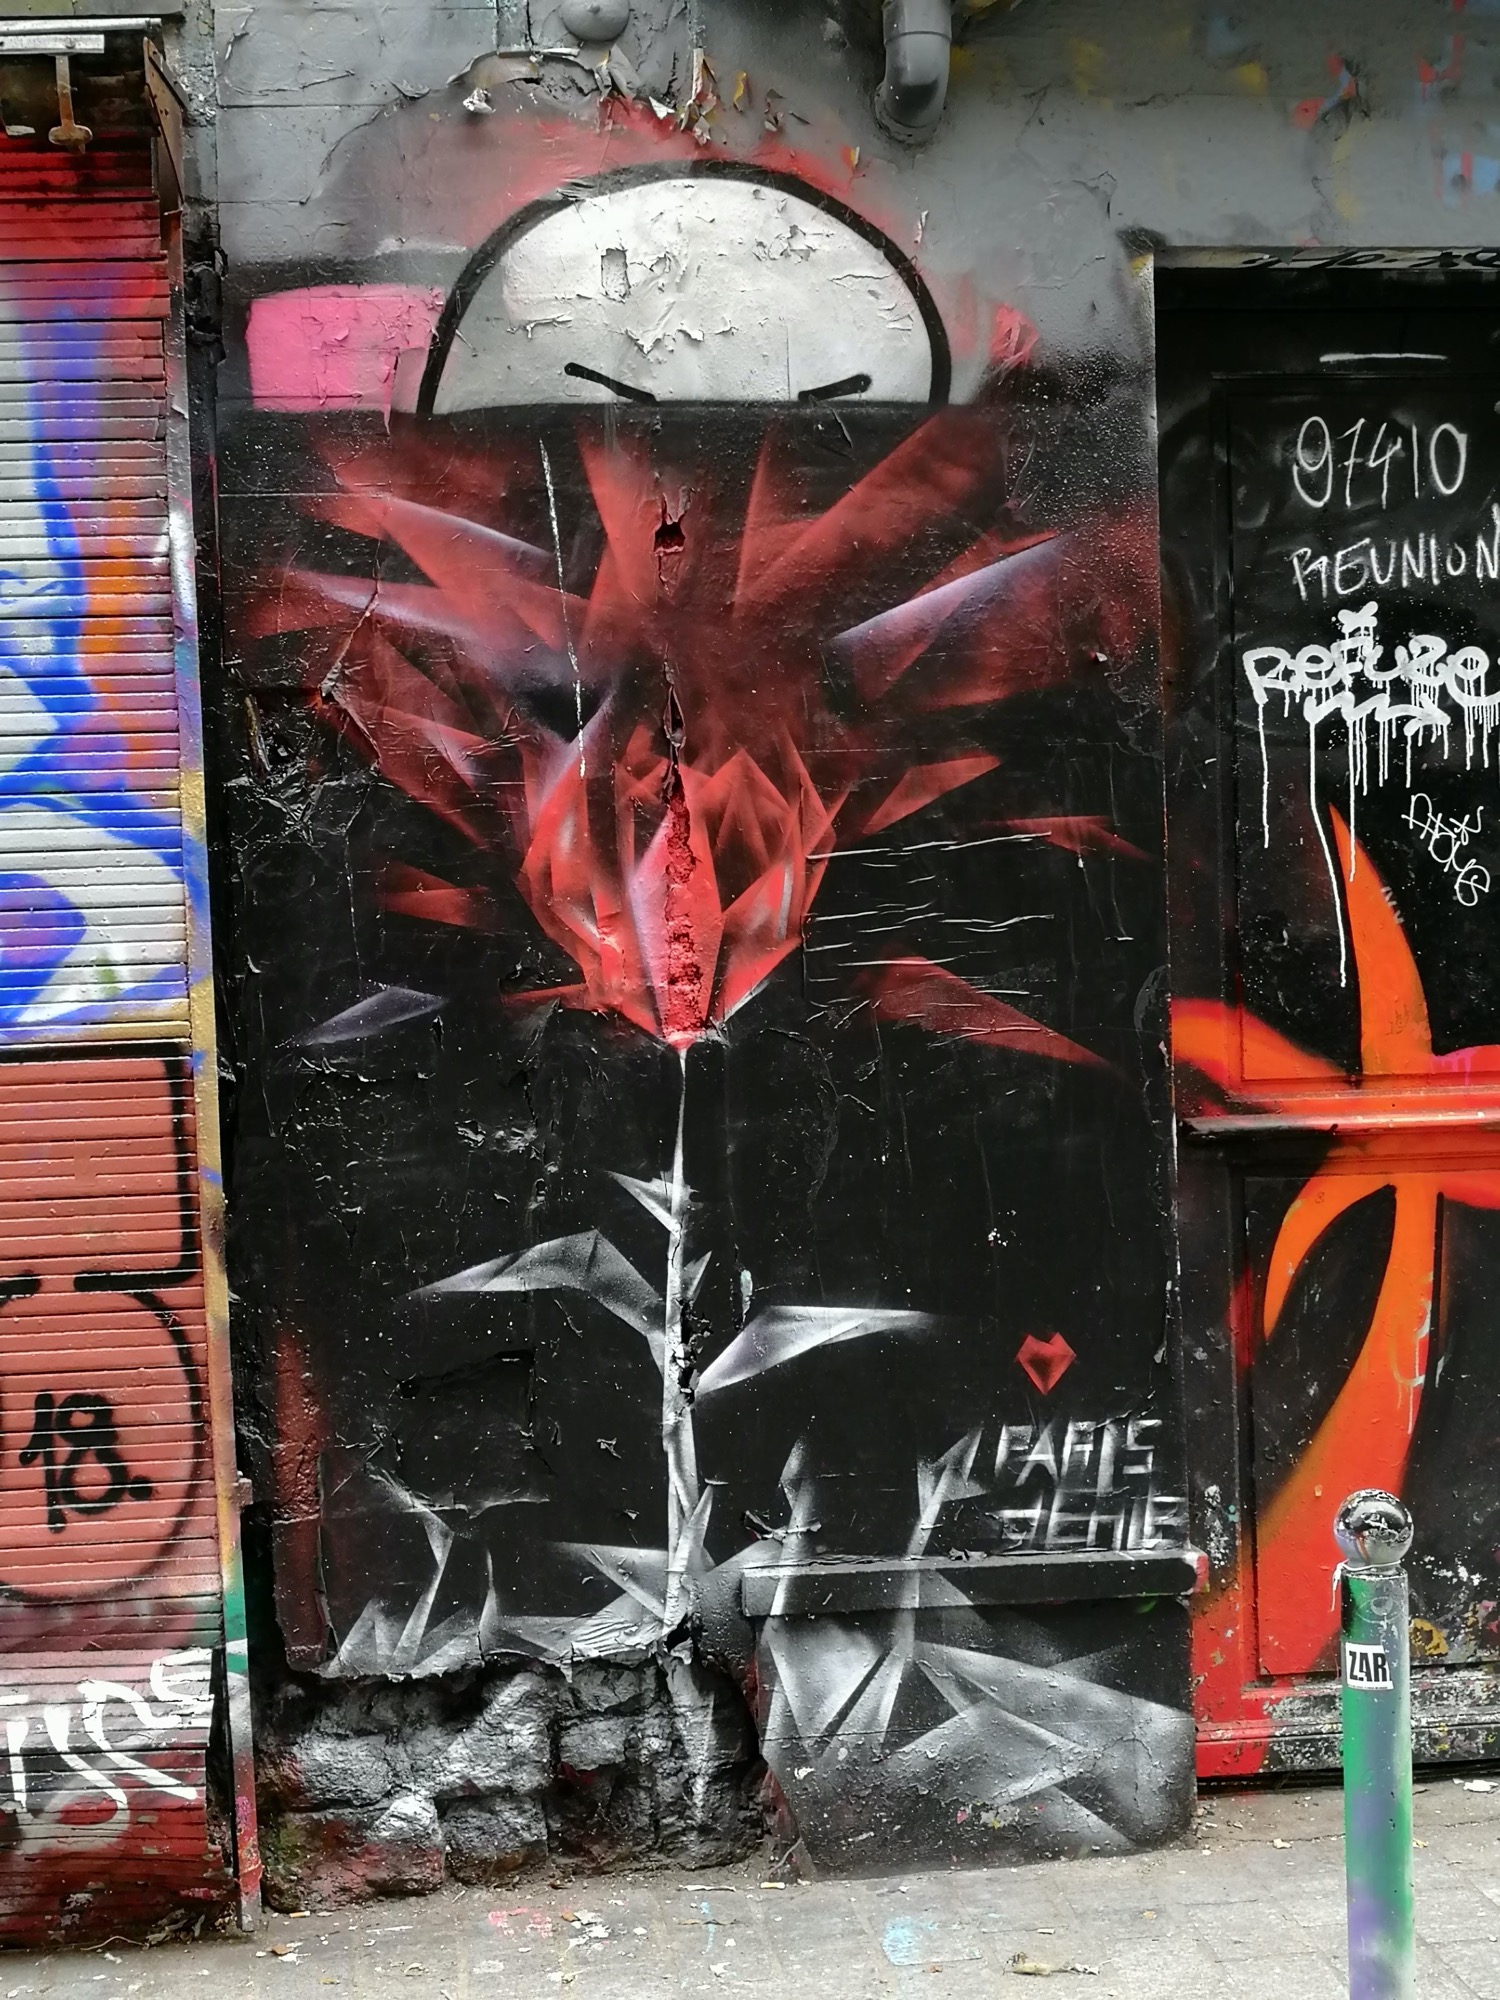 Graffiti 613 Rose captured by Rabot in Paris France